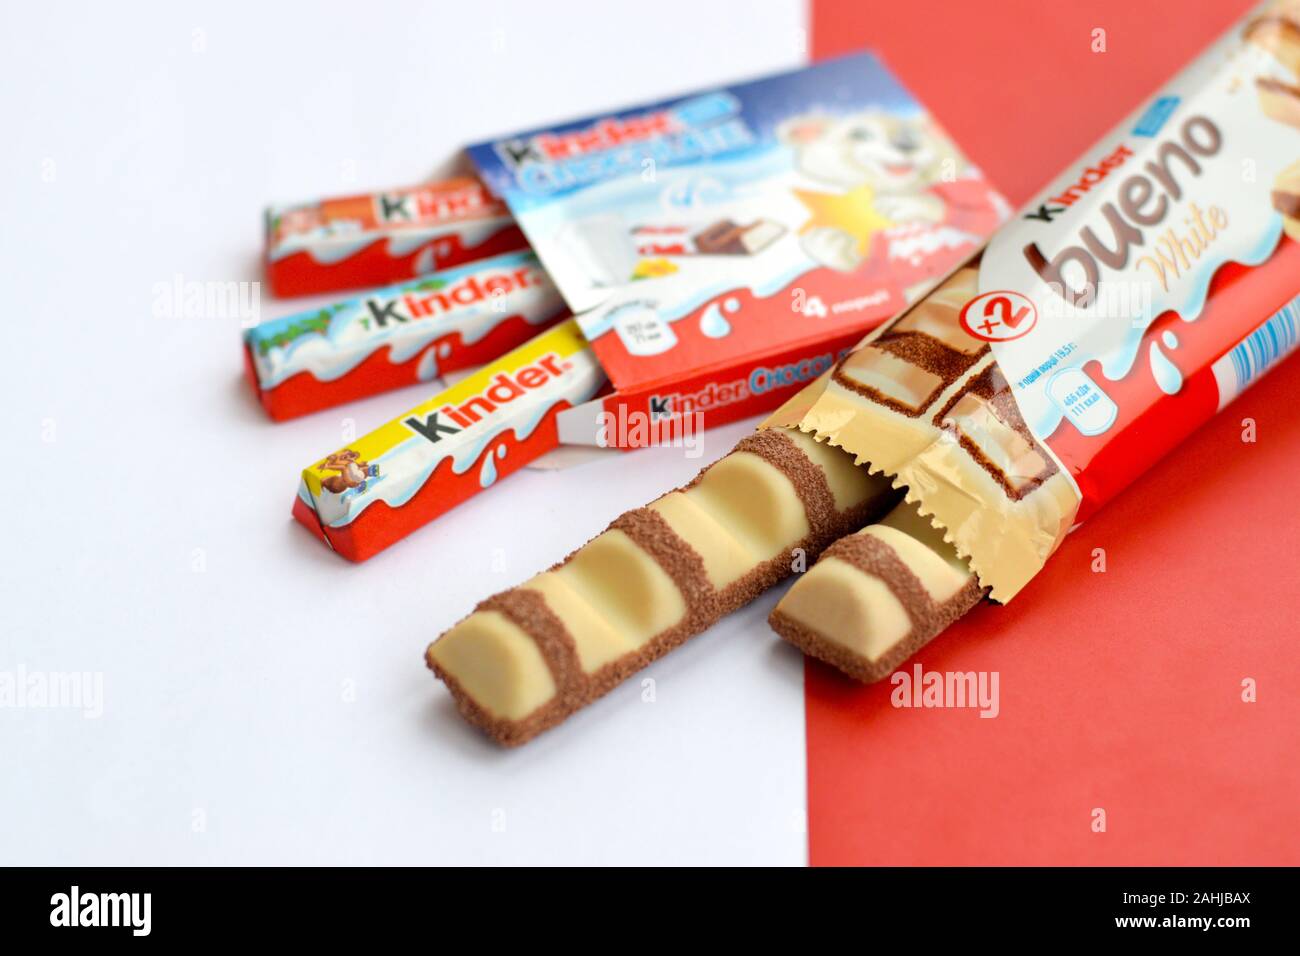 https://c8.alamy.com/comp/2AHJBAX/ny-usa-december-15-2019-kinder-chocolate-small-box-for-kids-and-bueno-white-chocolate-bar-made-by-ferrero-spa-kinder-is-a-confectionery-product-2AHJBAX.jpg